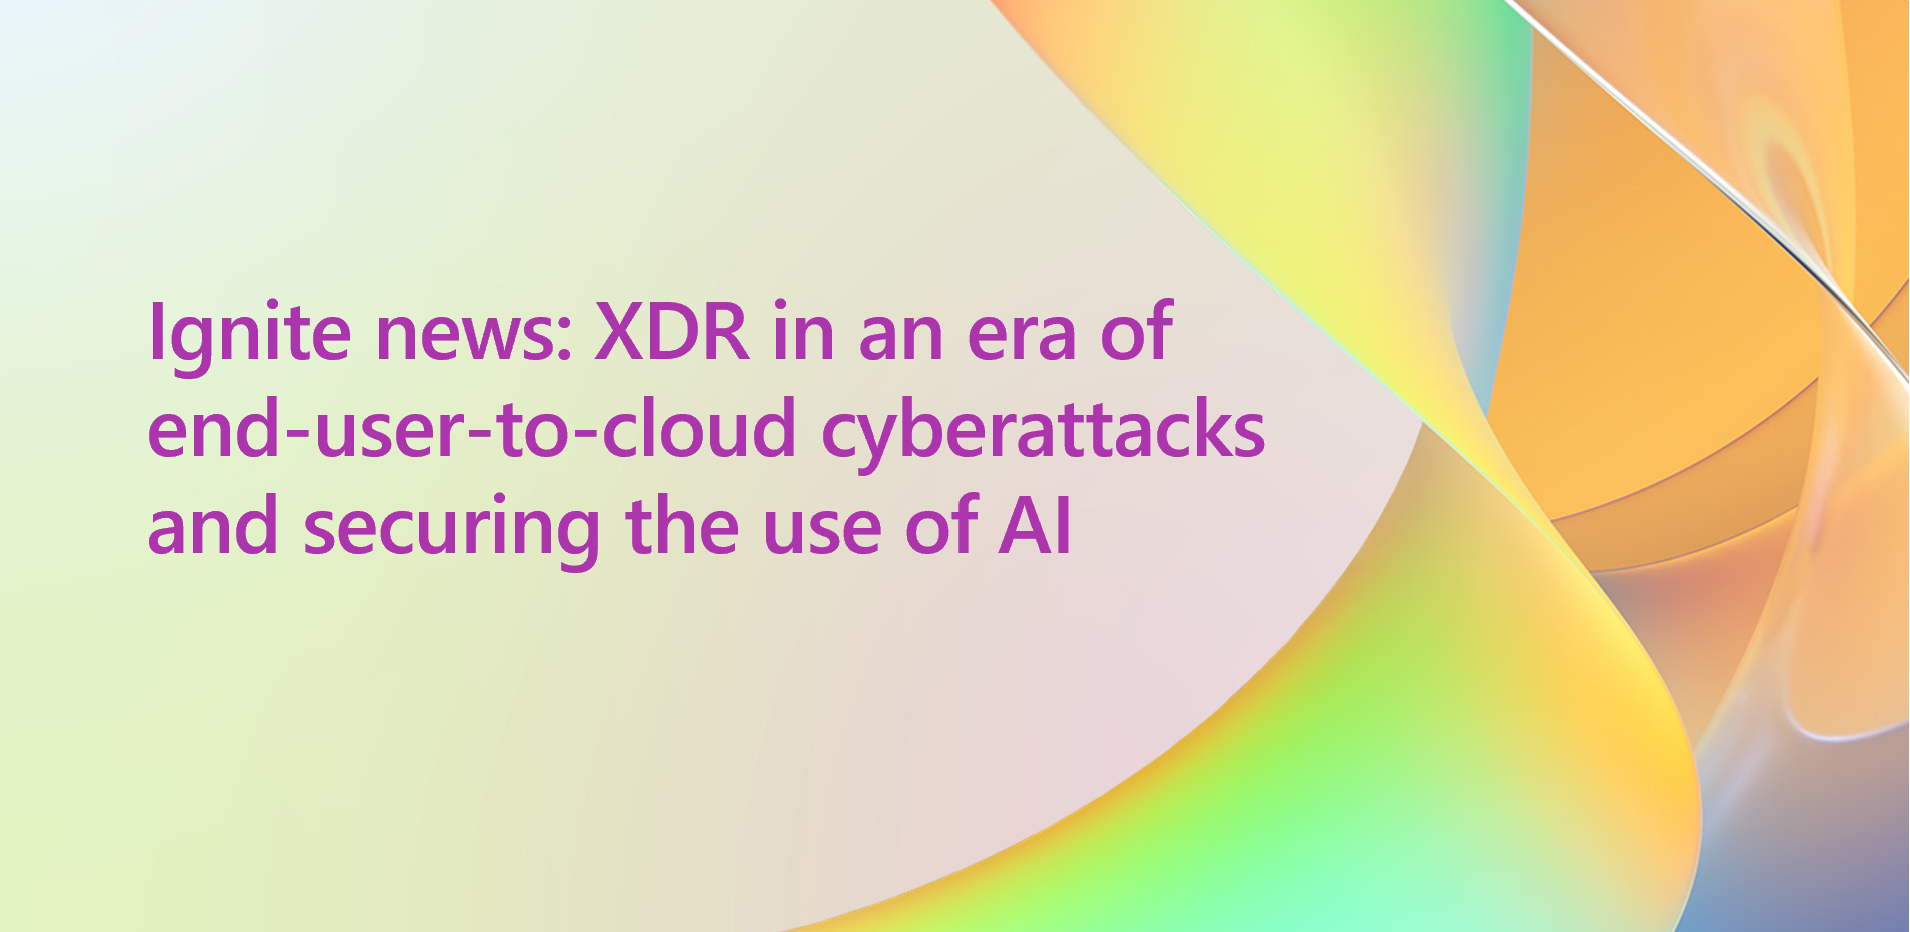 Ignite news: XDR in an era of end-user-to-cloud cyberattacks and securing the use of AI